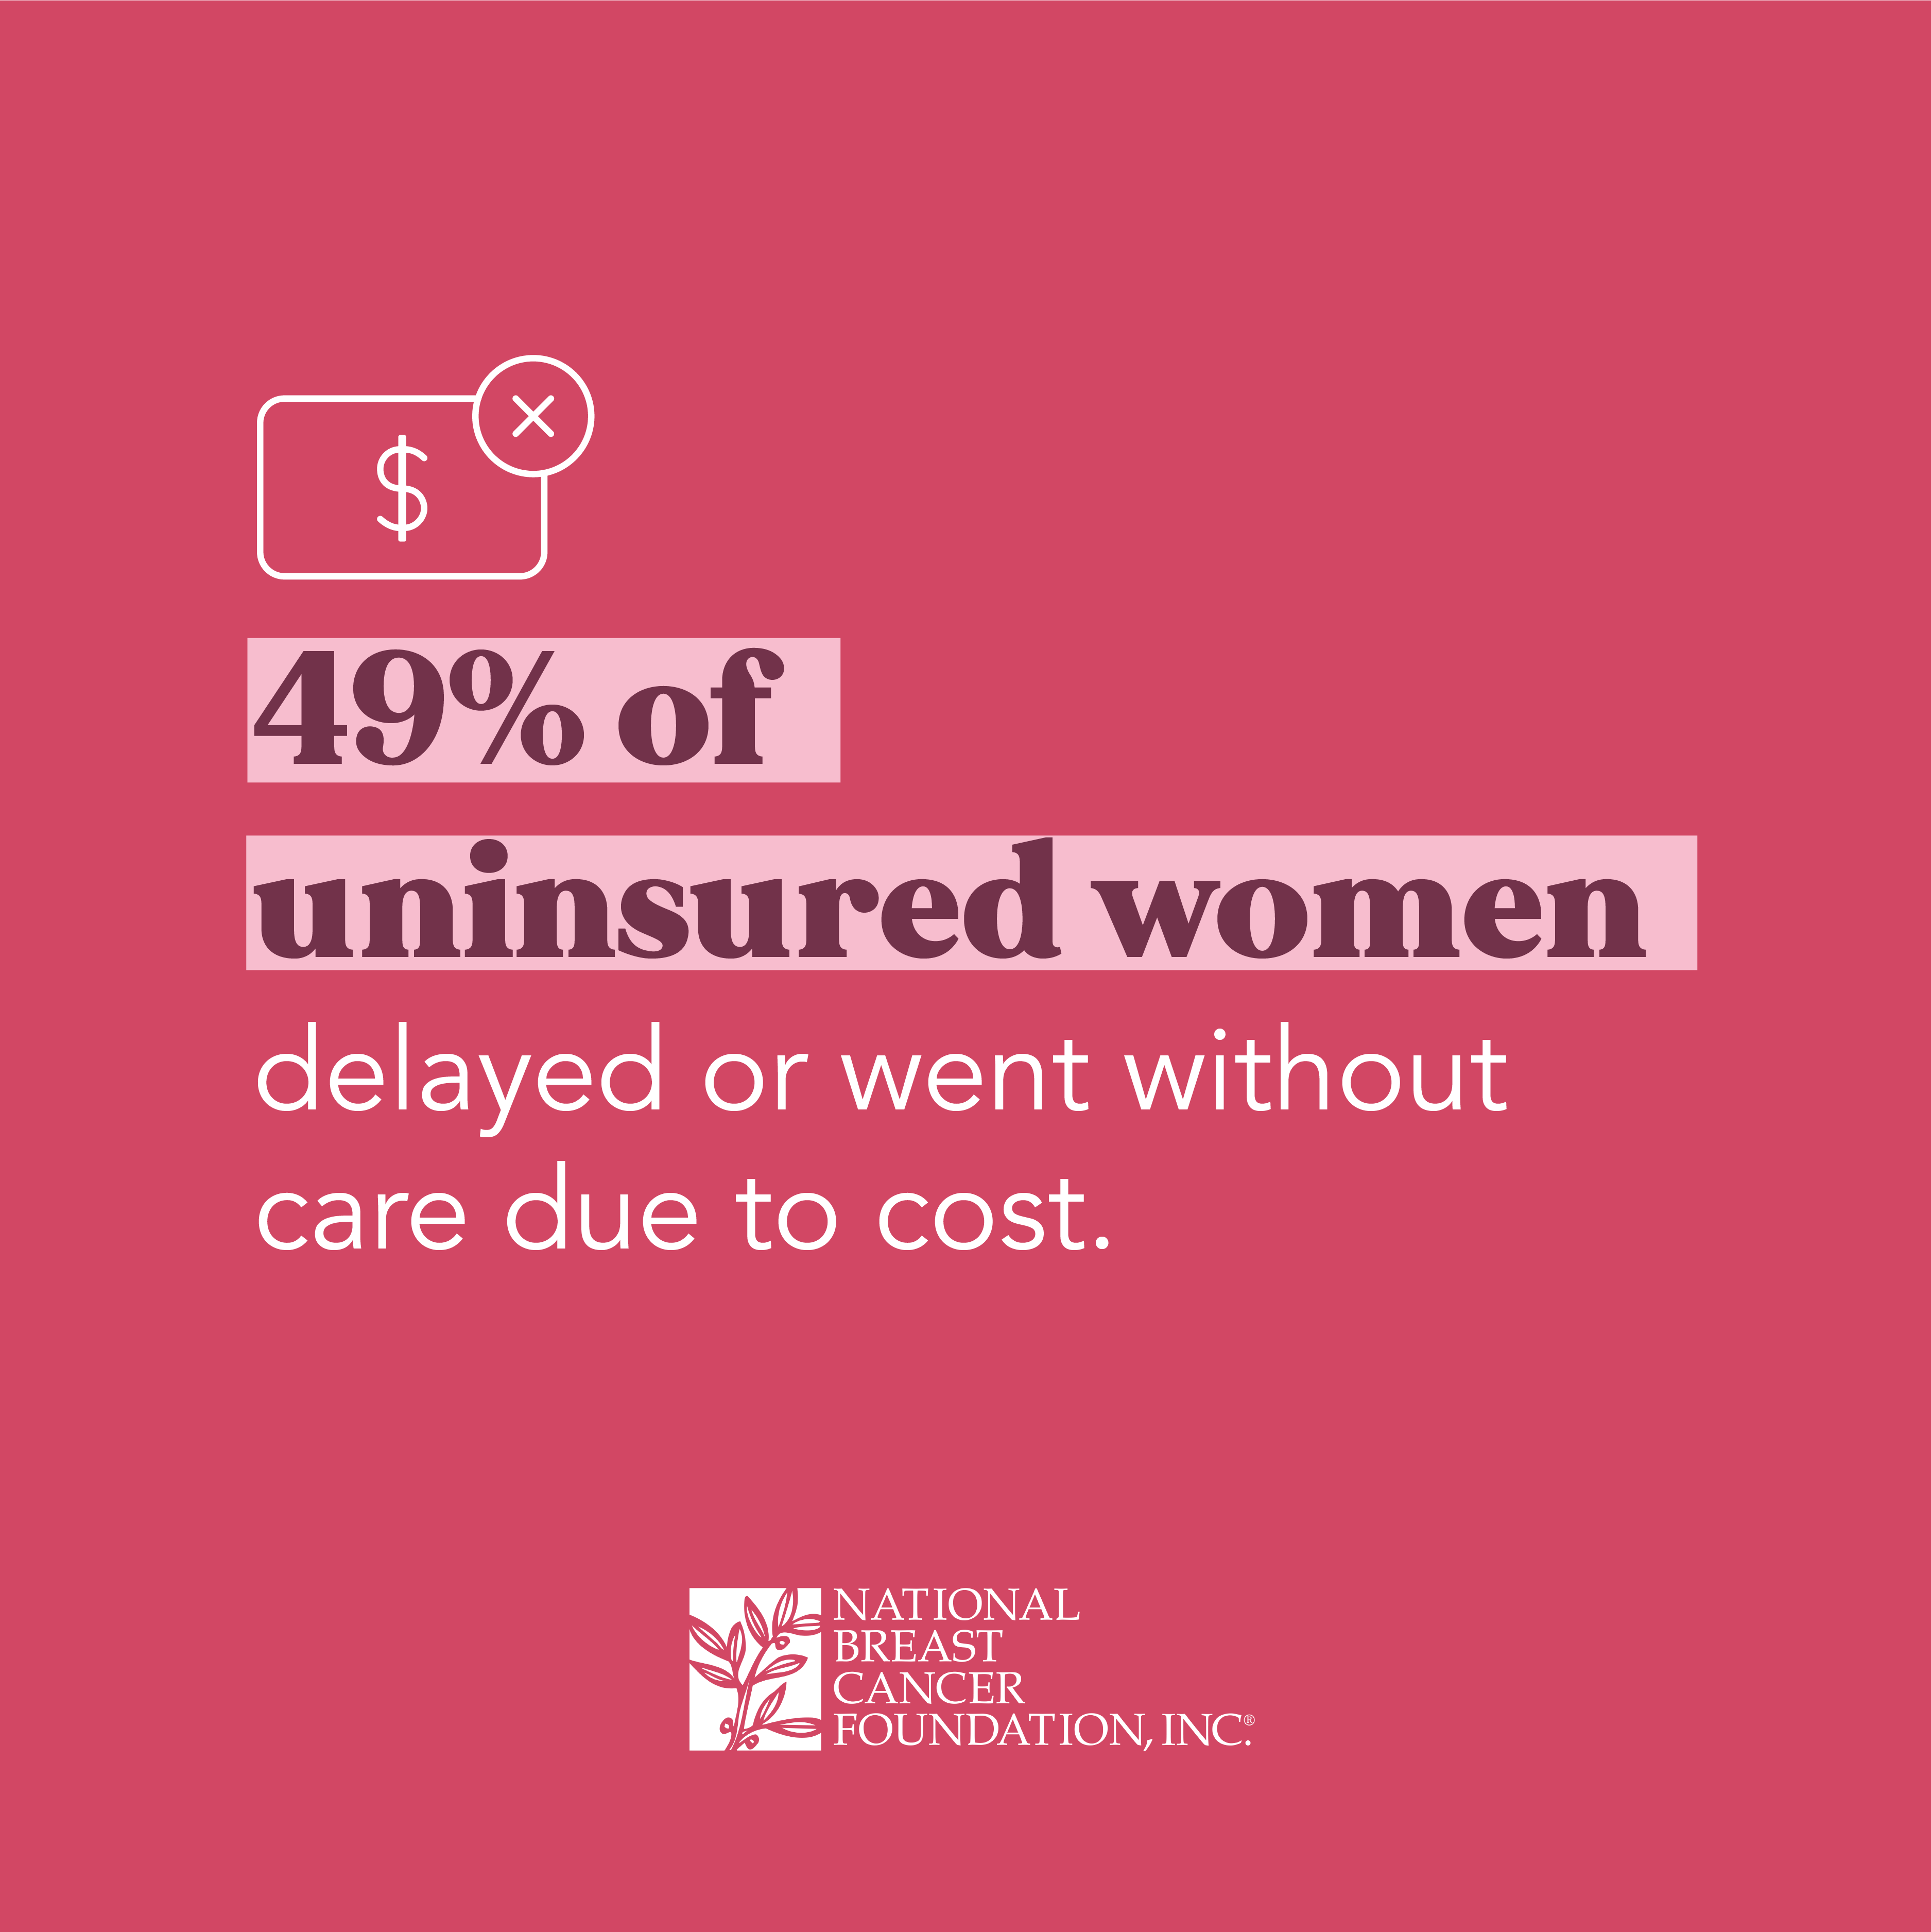 49 percent of uninsured women delayed or went without care due to cost